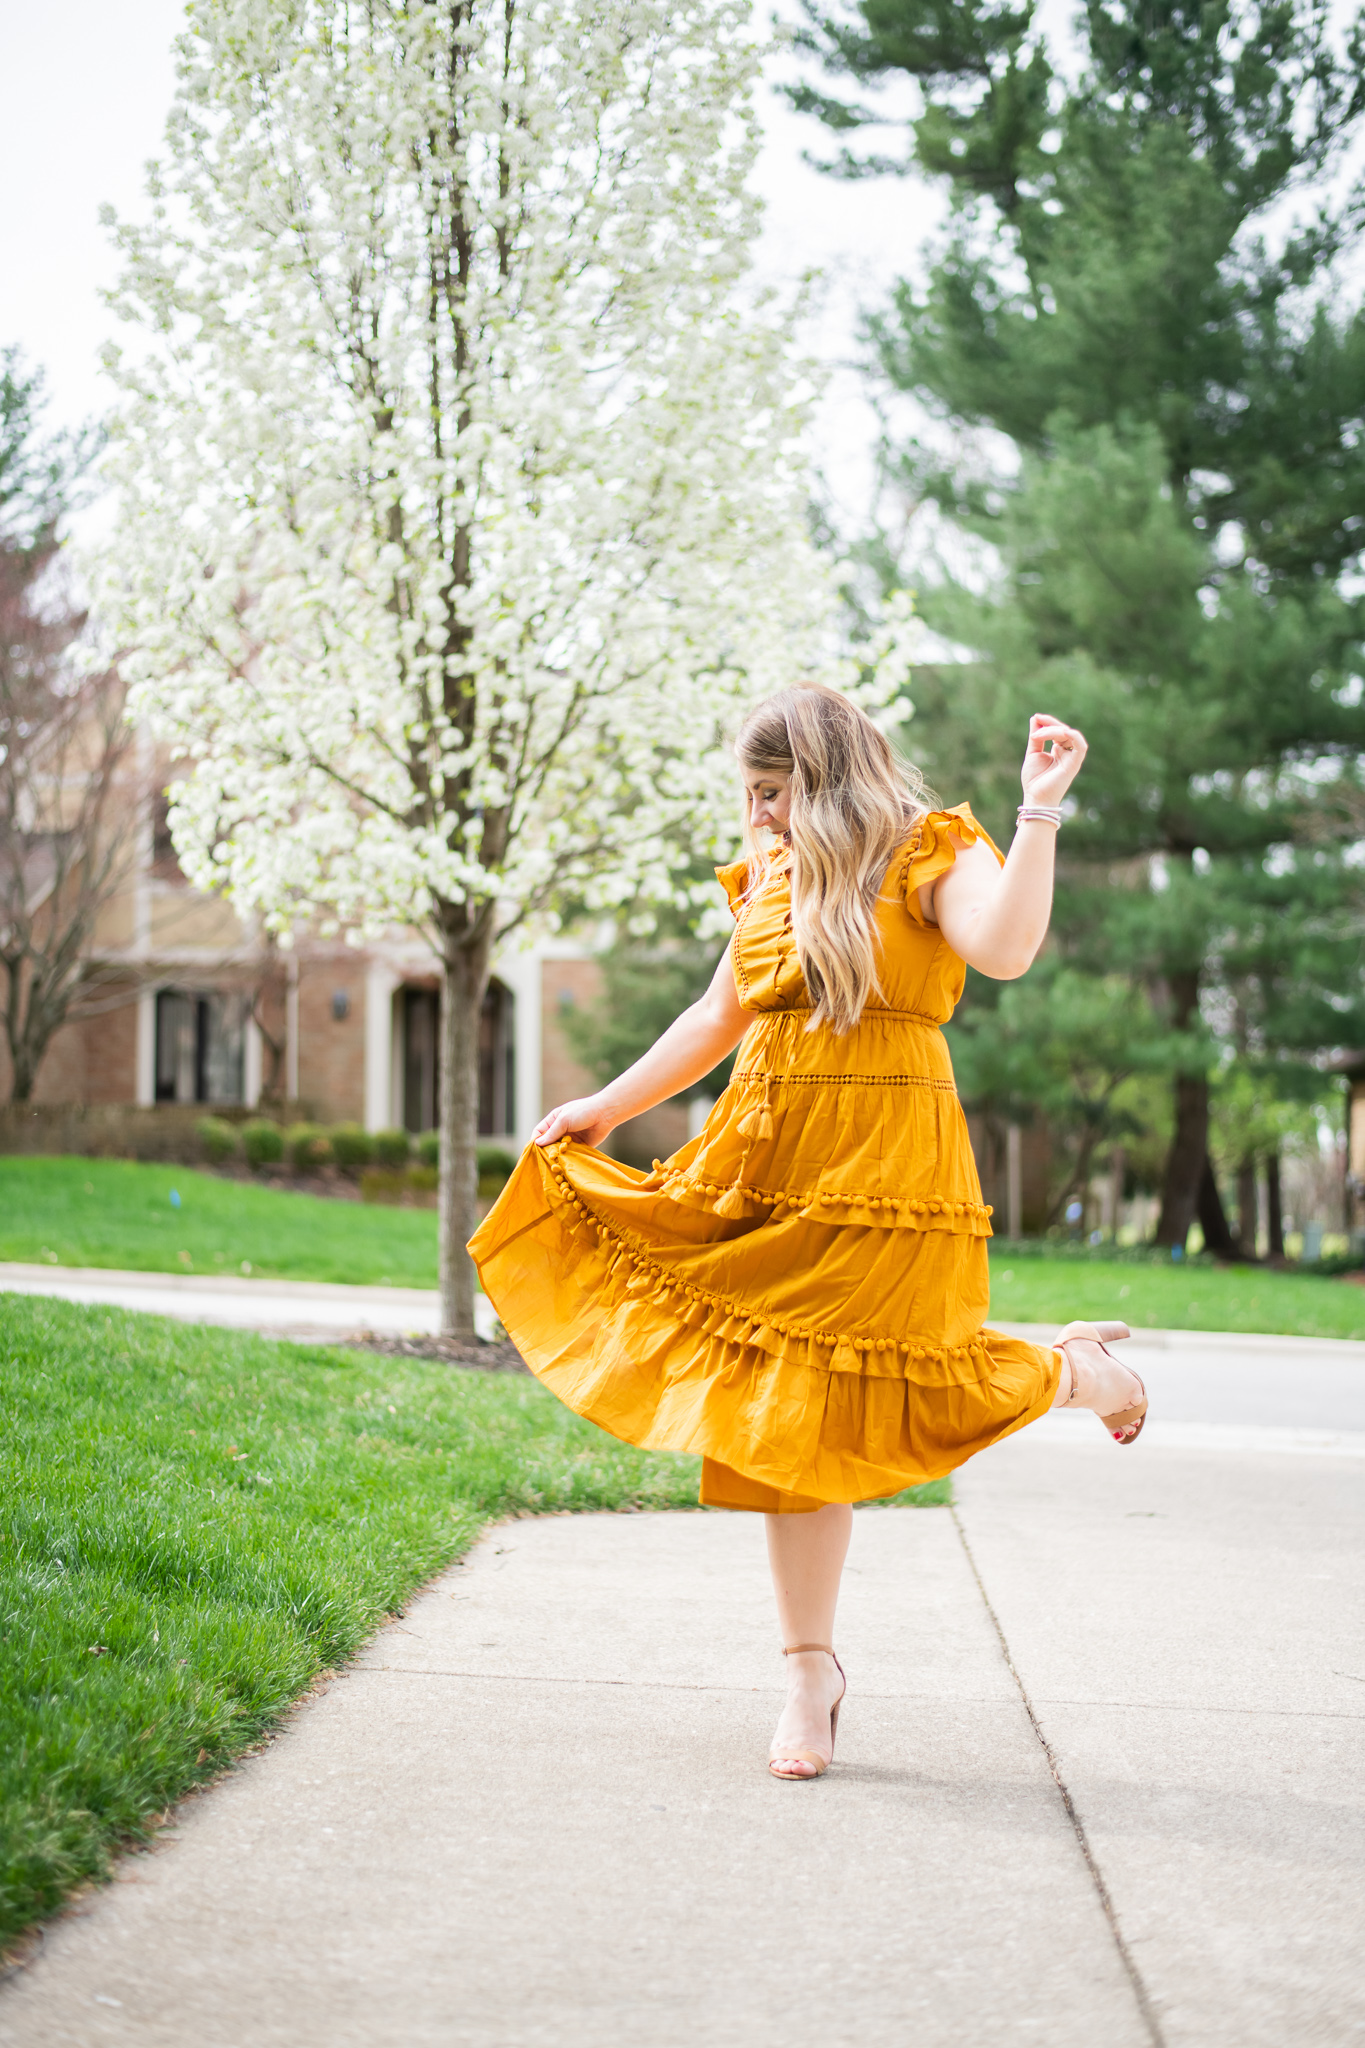 Summer Skin Care Tips with Cetaphil by popular North Carolina beauty blog, Coffee Beans and Bobby Pins: image of a woman wearing a mustard color dress and and dancing outside by some trees with white blossoms on them.